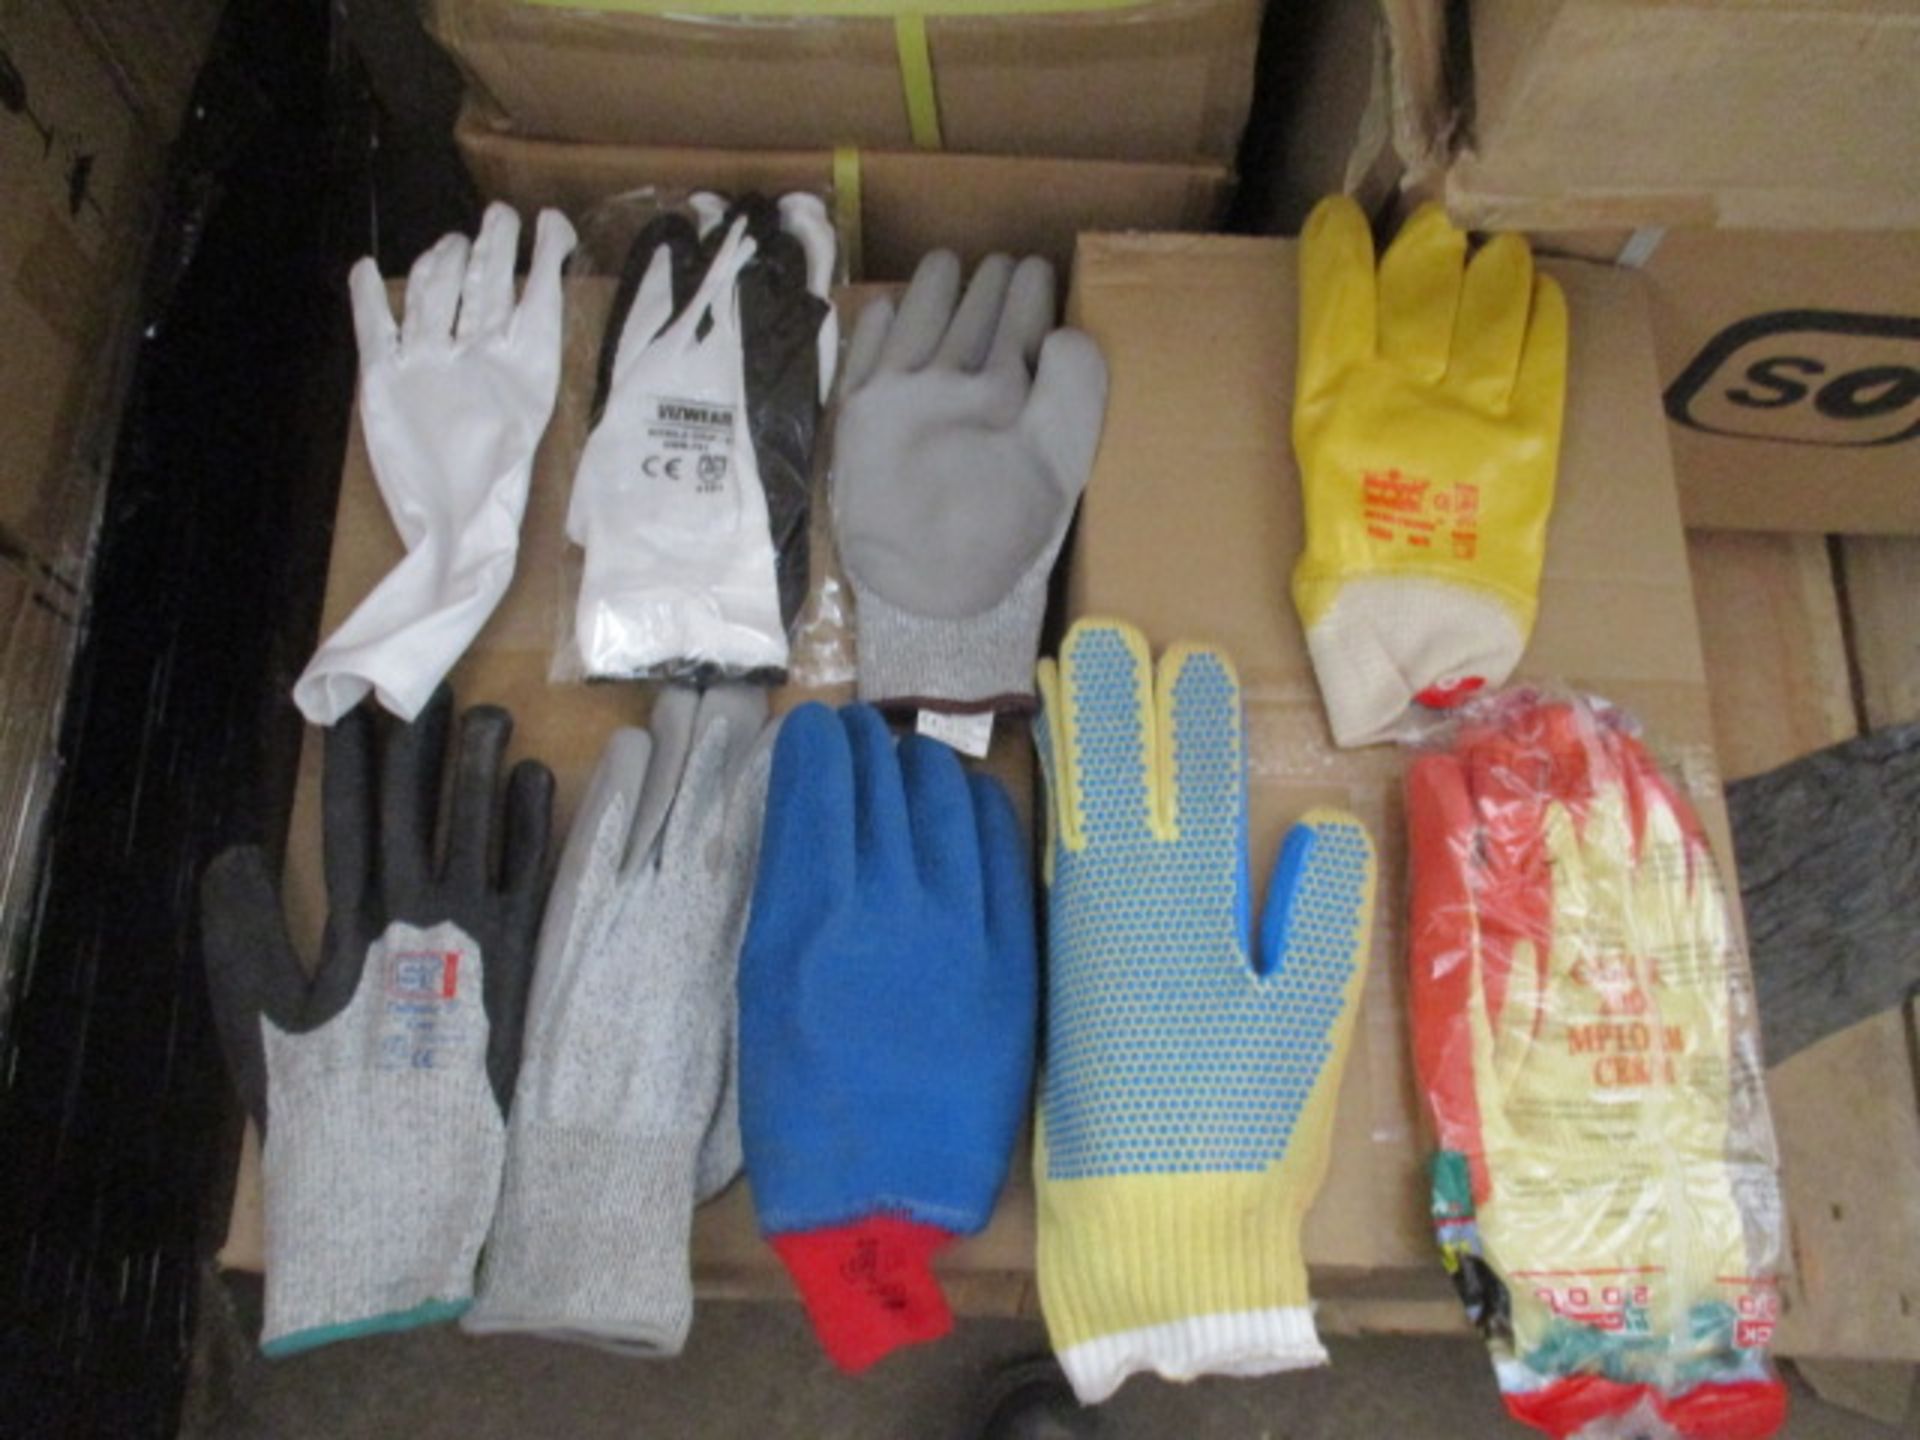 500pcs x Assorted Mix of Workwear / Garden /Nitrile / protective and other gloves - all adult mens a